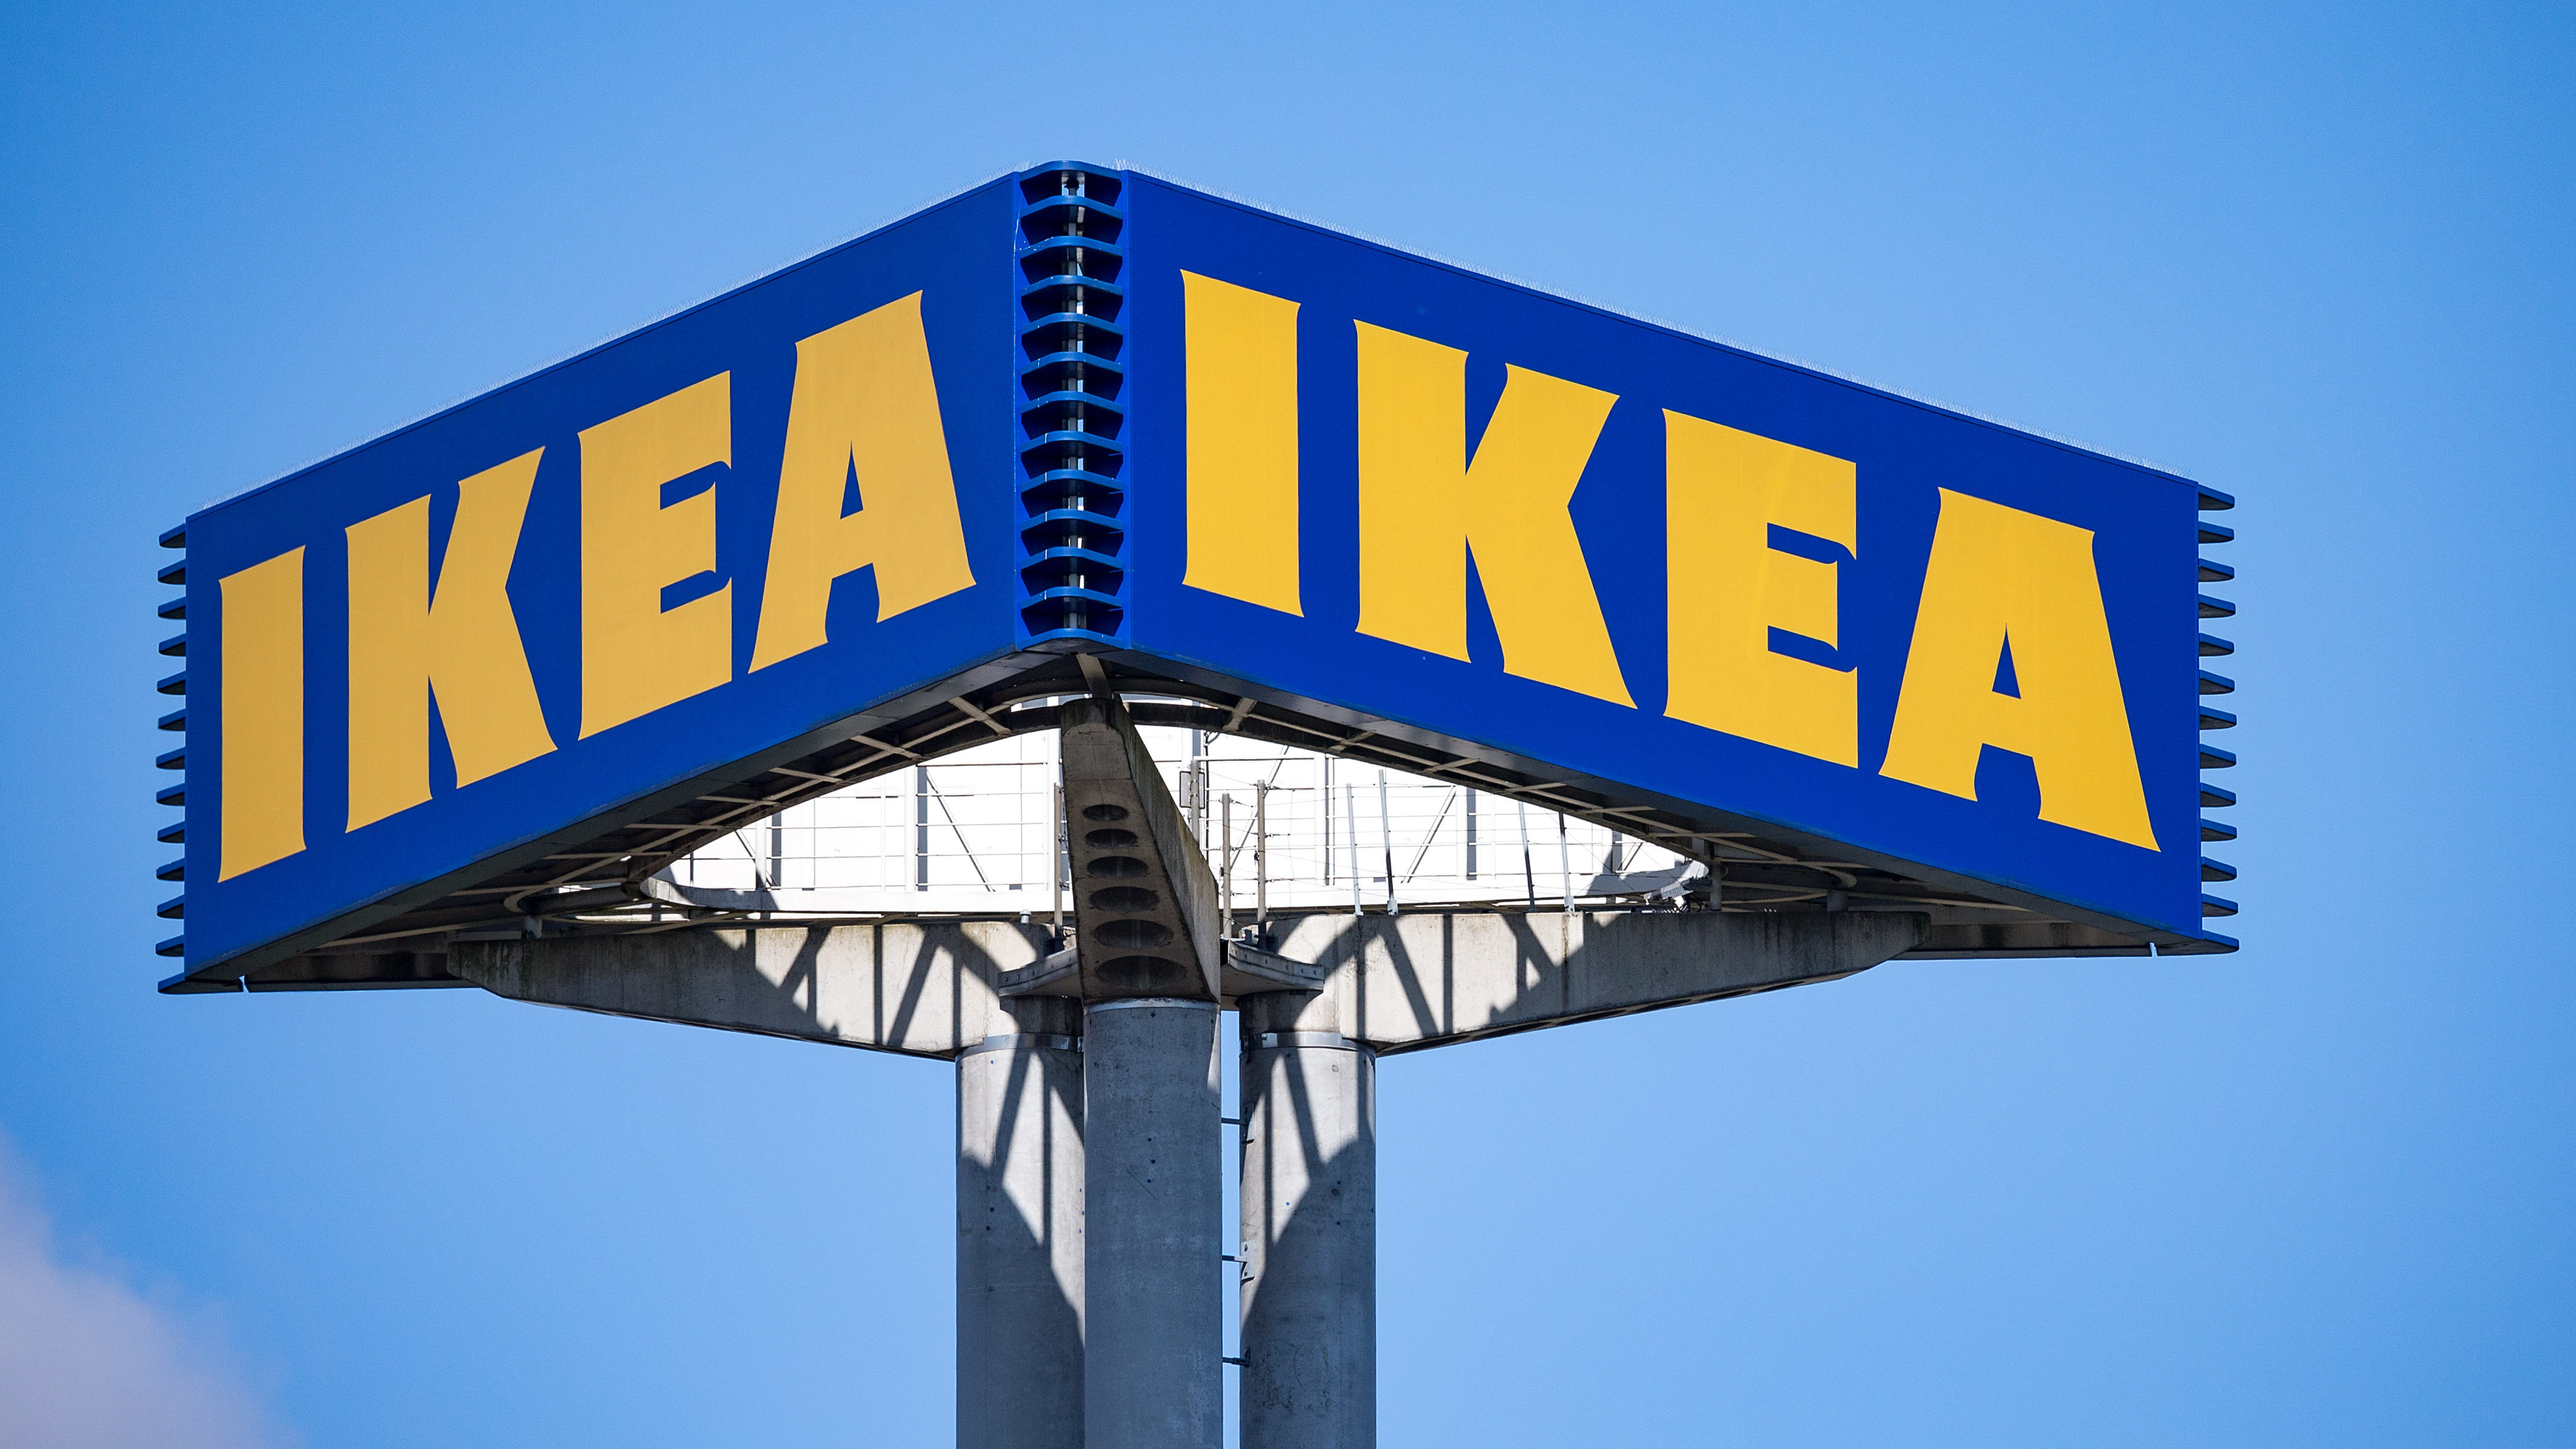 IKEA Set To Reopen 19 Stores Across England And Northern Ireland On 1 June